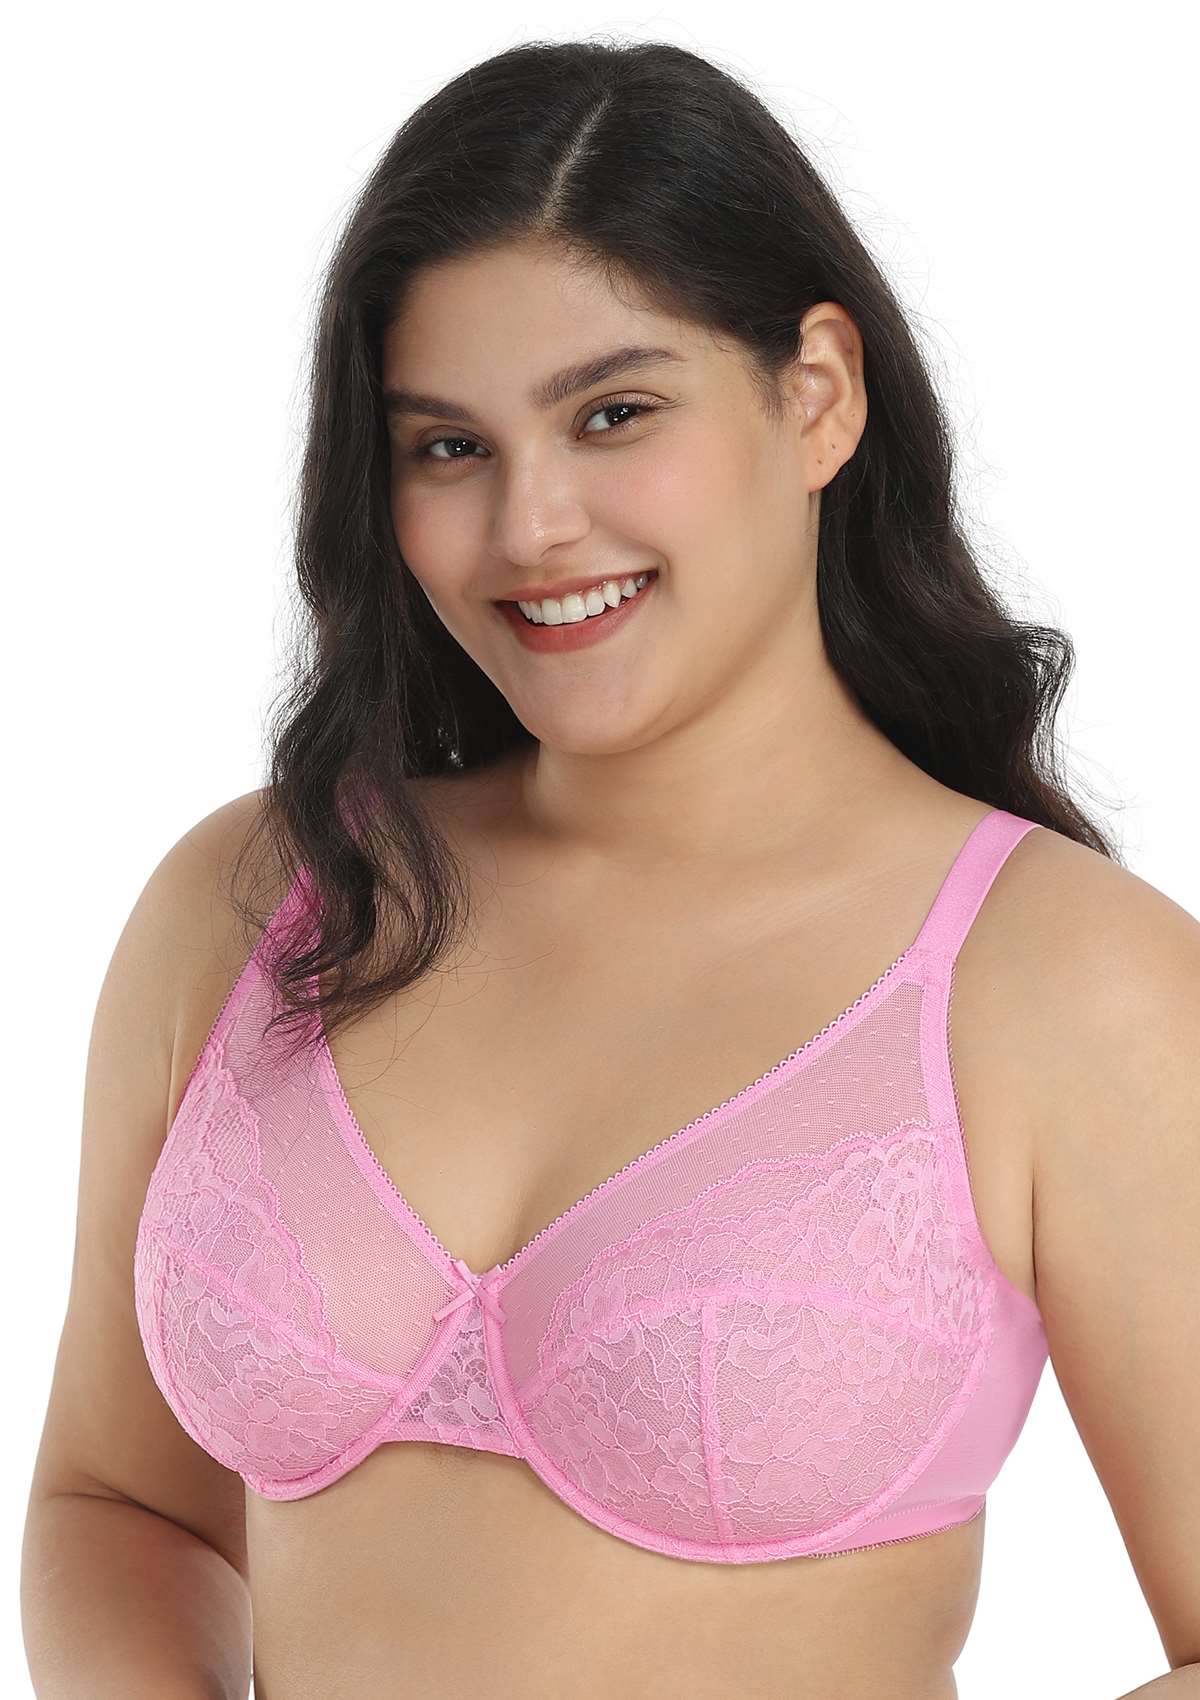 HSIA Enchante Lacy Bra: Comfy Sheer Lace Bra With Lift - Pink / 40 / DDD/F